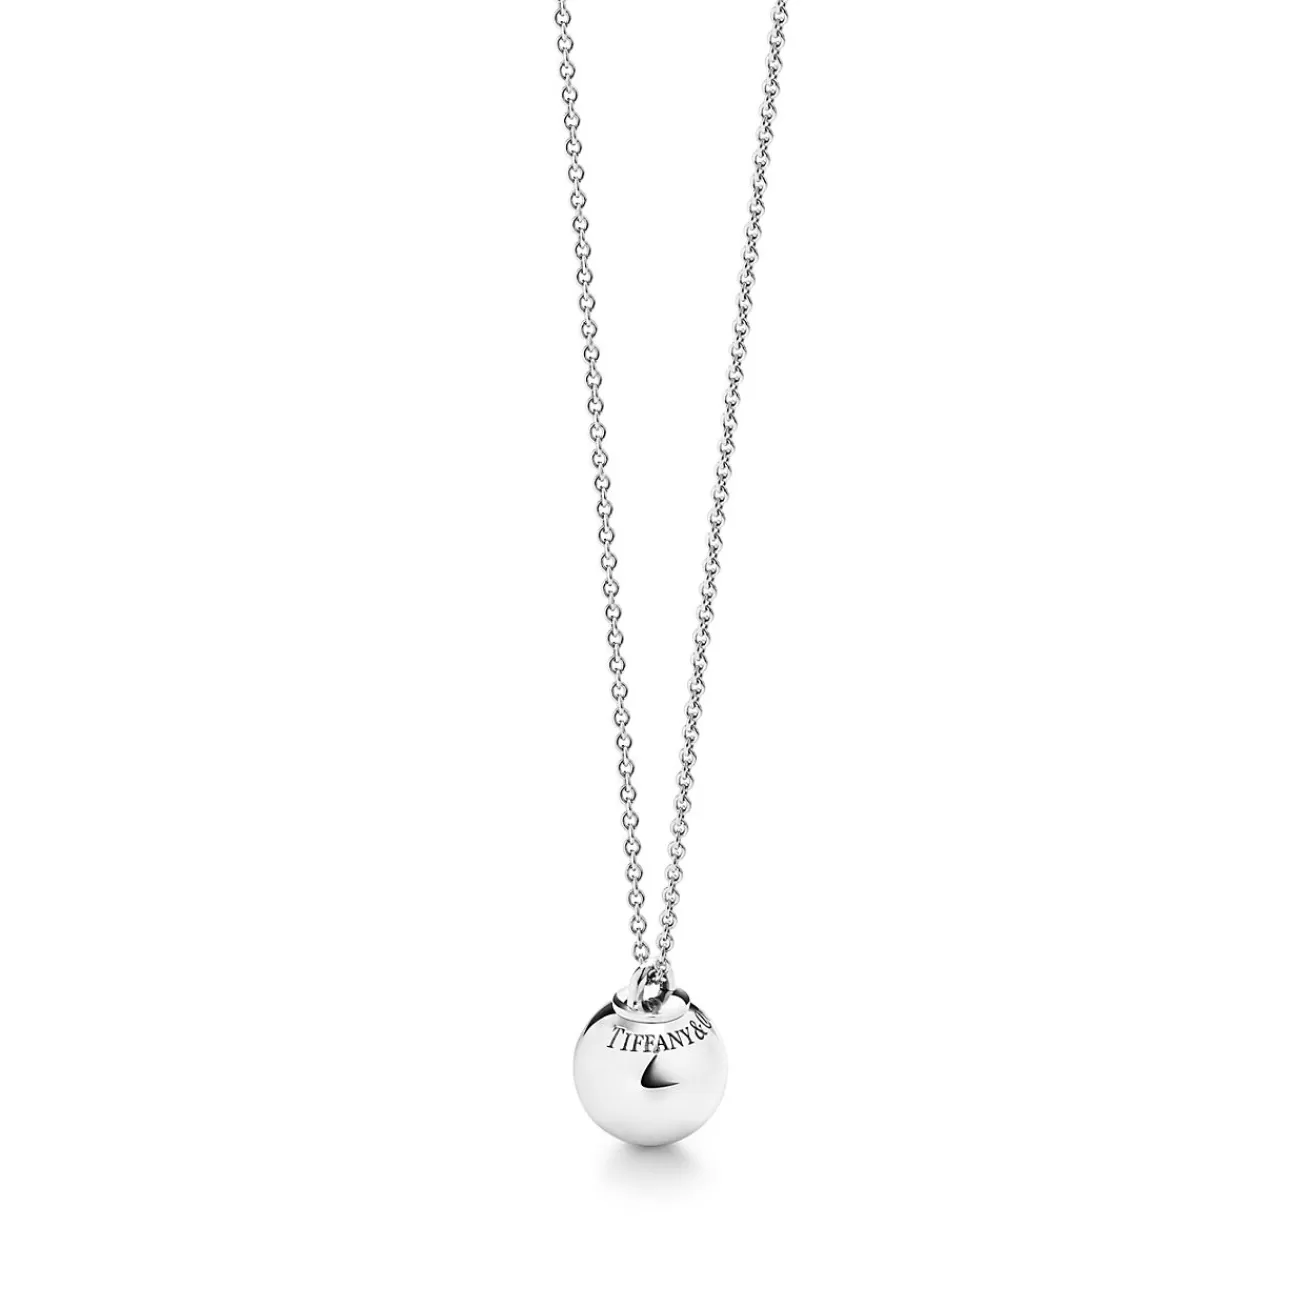 Tiffany & Co. Shop Tiffany HardWear Sterling Silver Ball Pendant | ^ Necklaces & Pendants | Gifts for Her